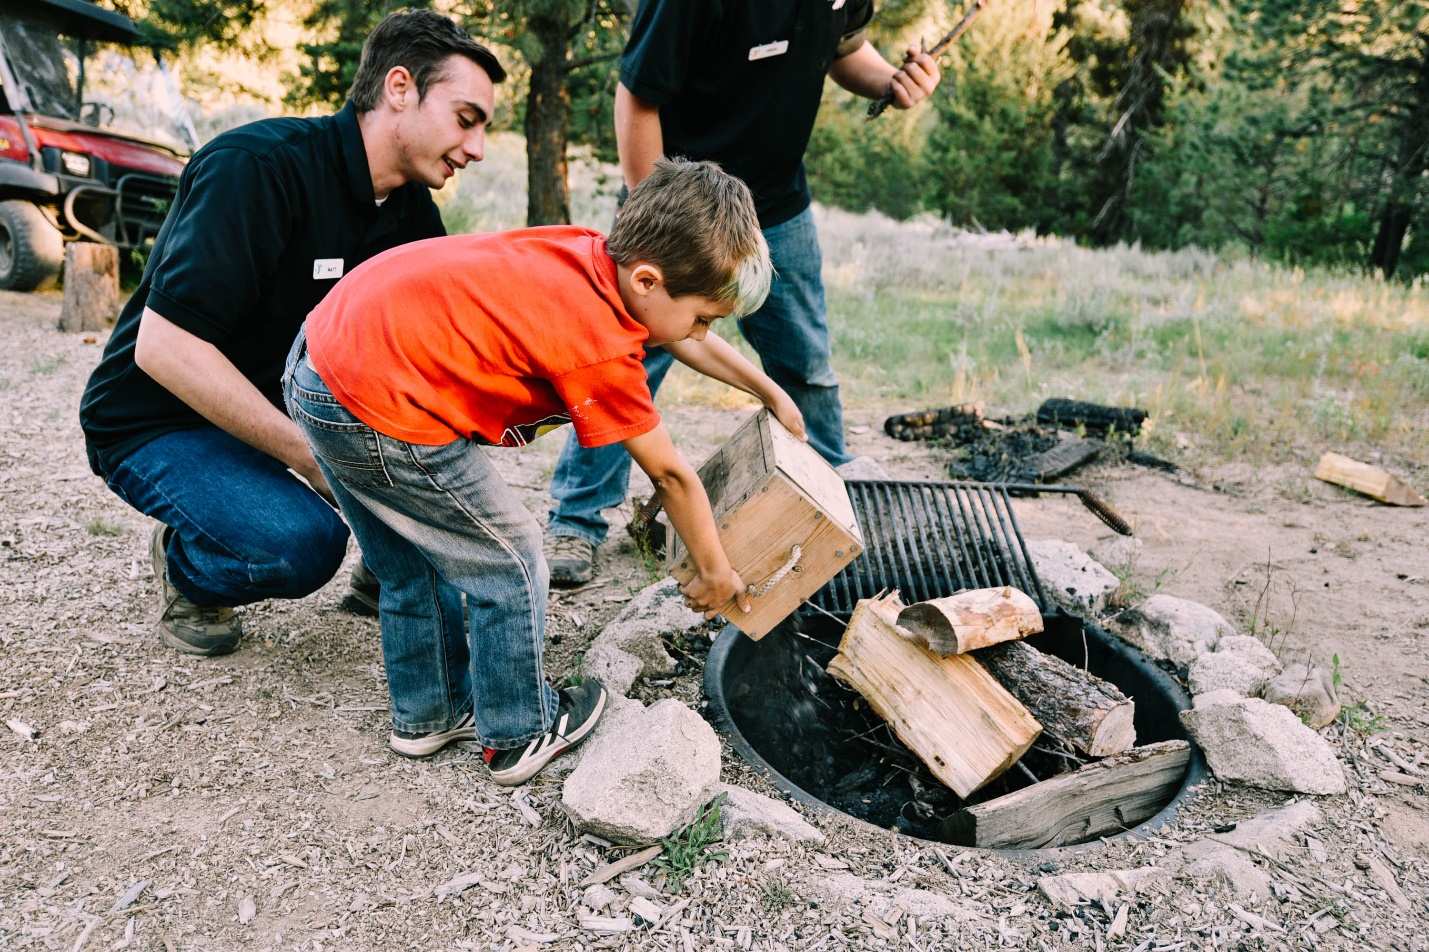 A young boy wearing an orange t-shirt and jeans dumps wooden logs onto a firepit while an adult wearing a black t-shirt helps. 